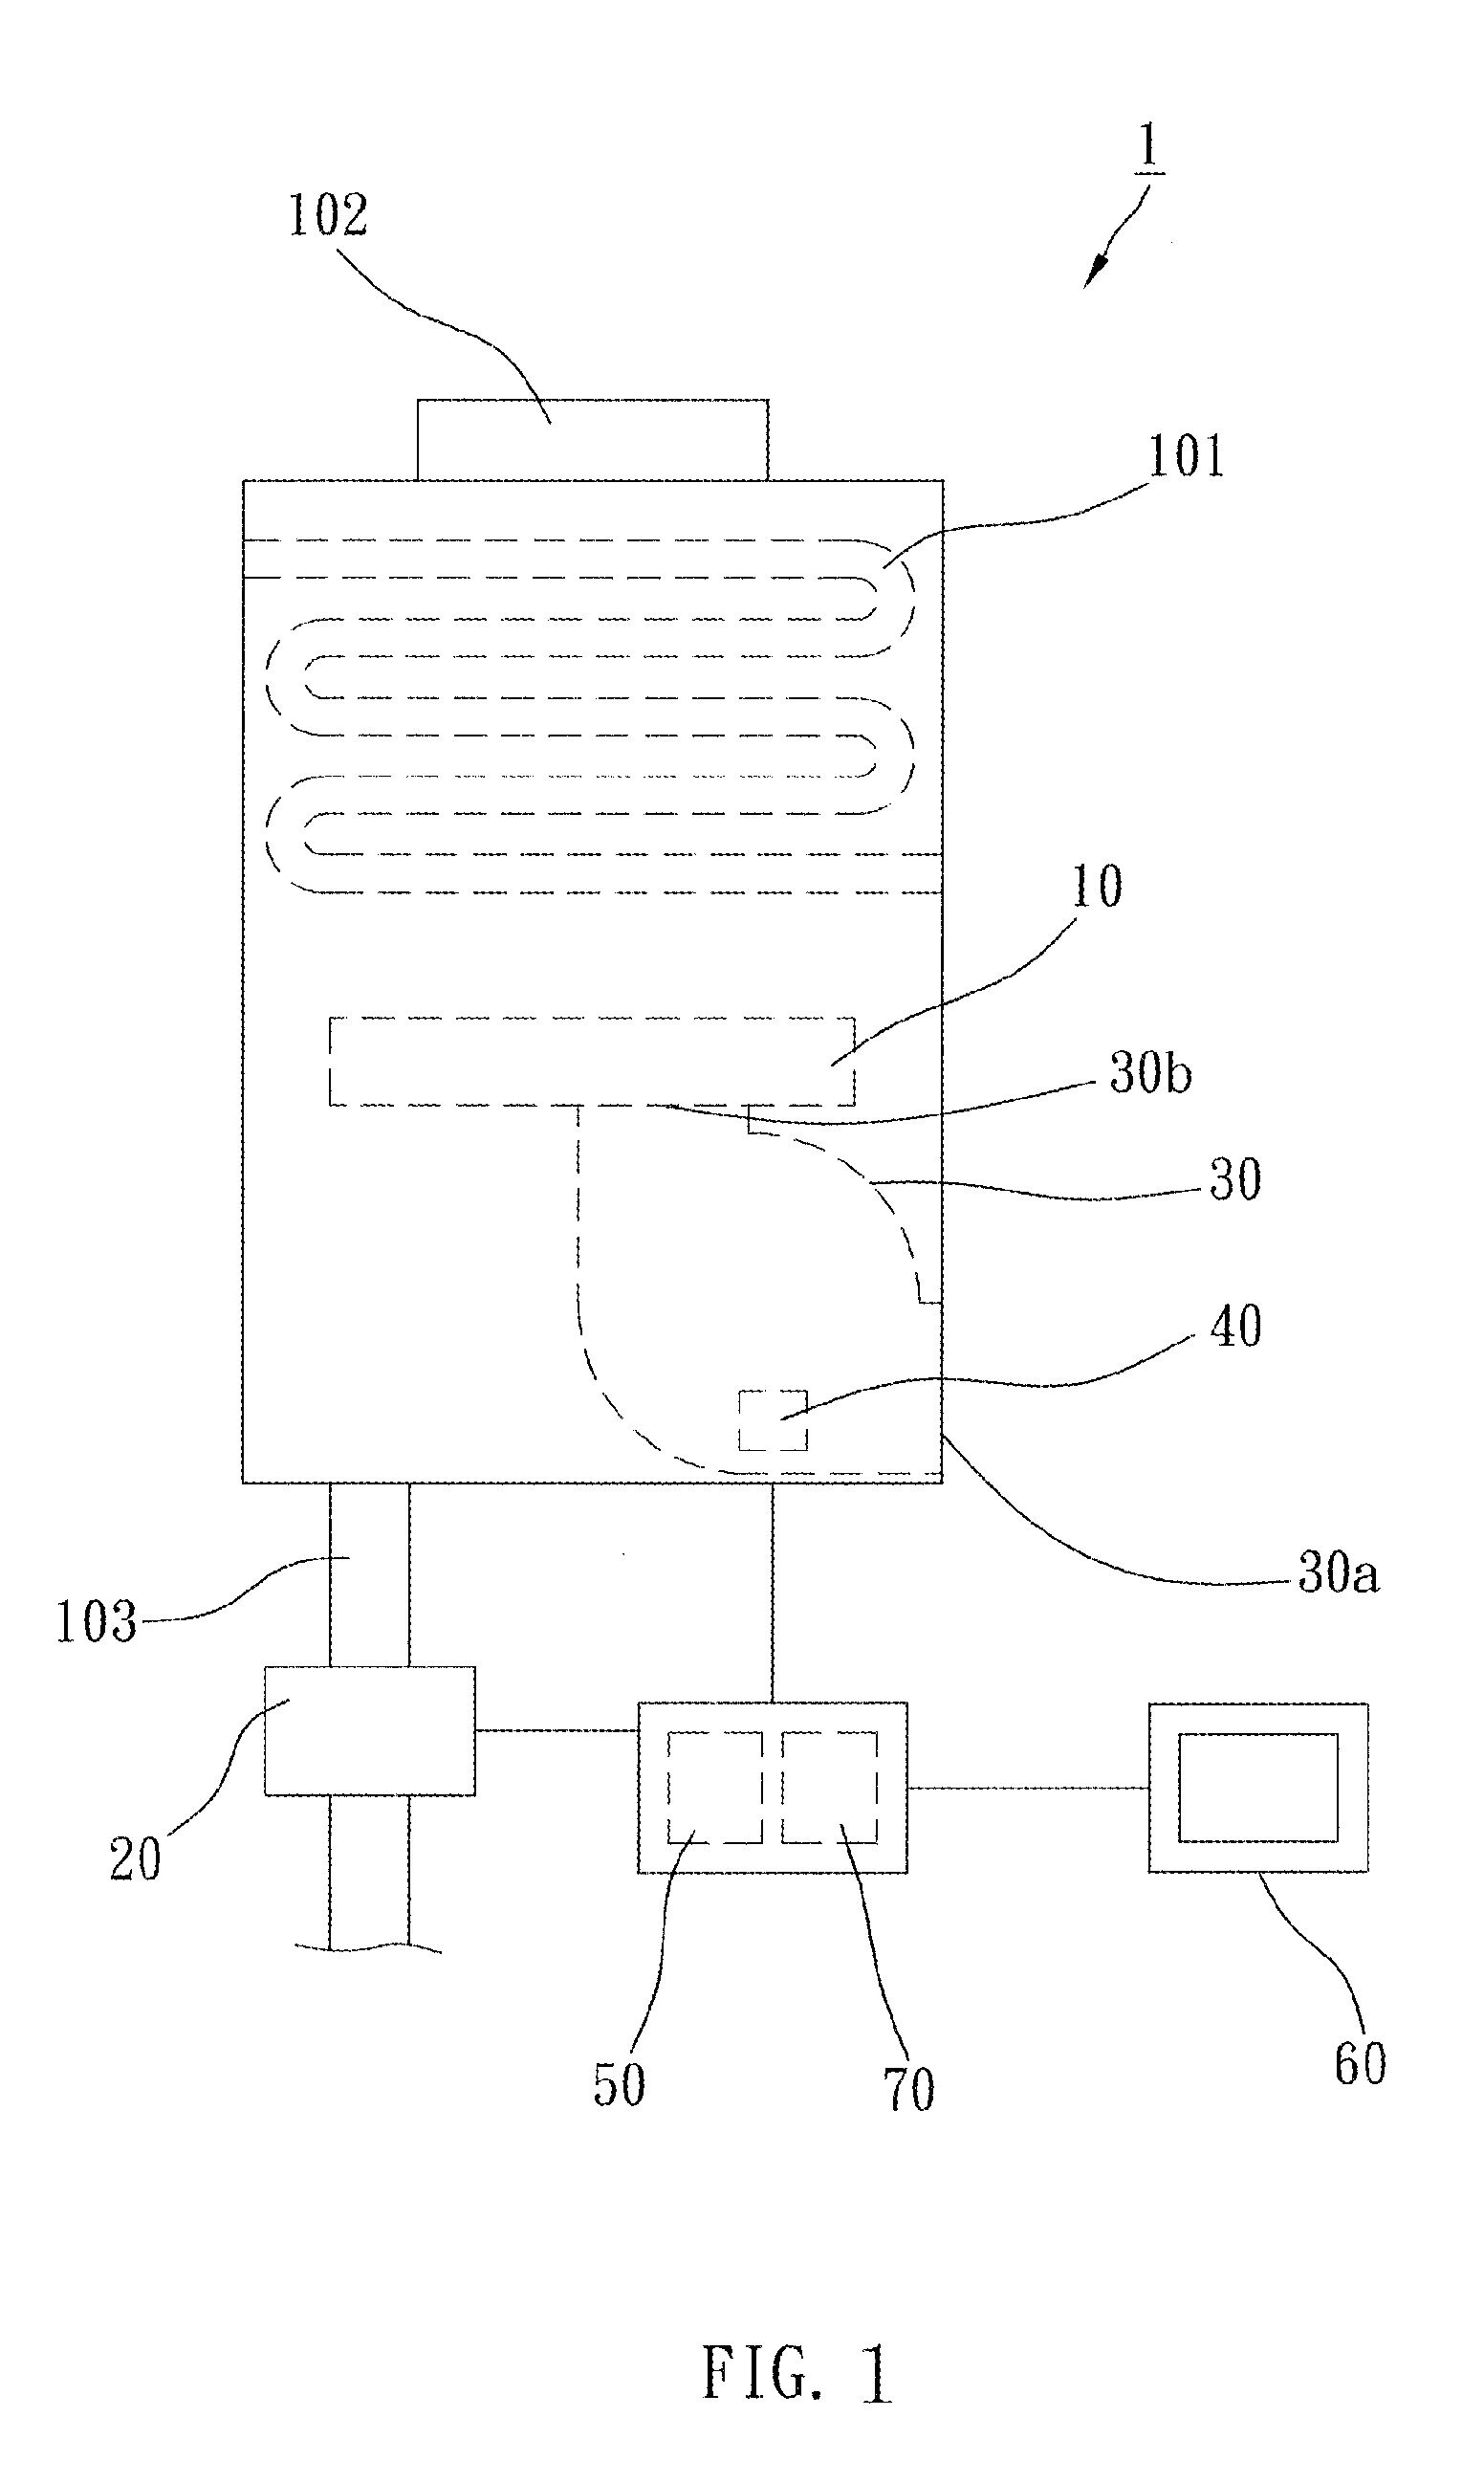 Method of detecting safety of water heater